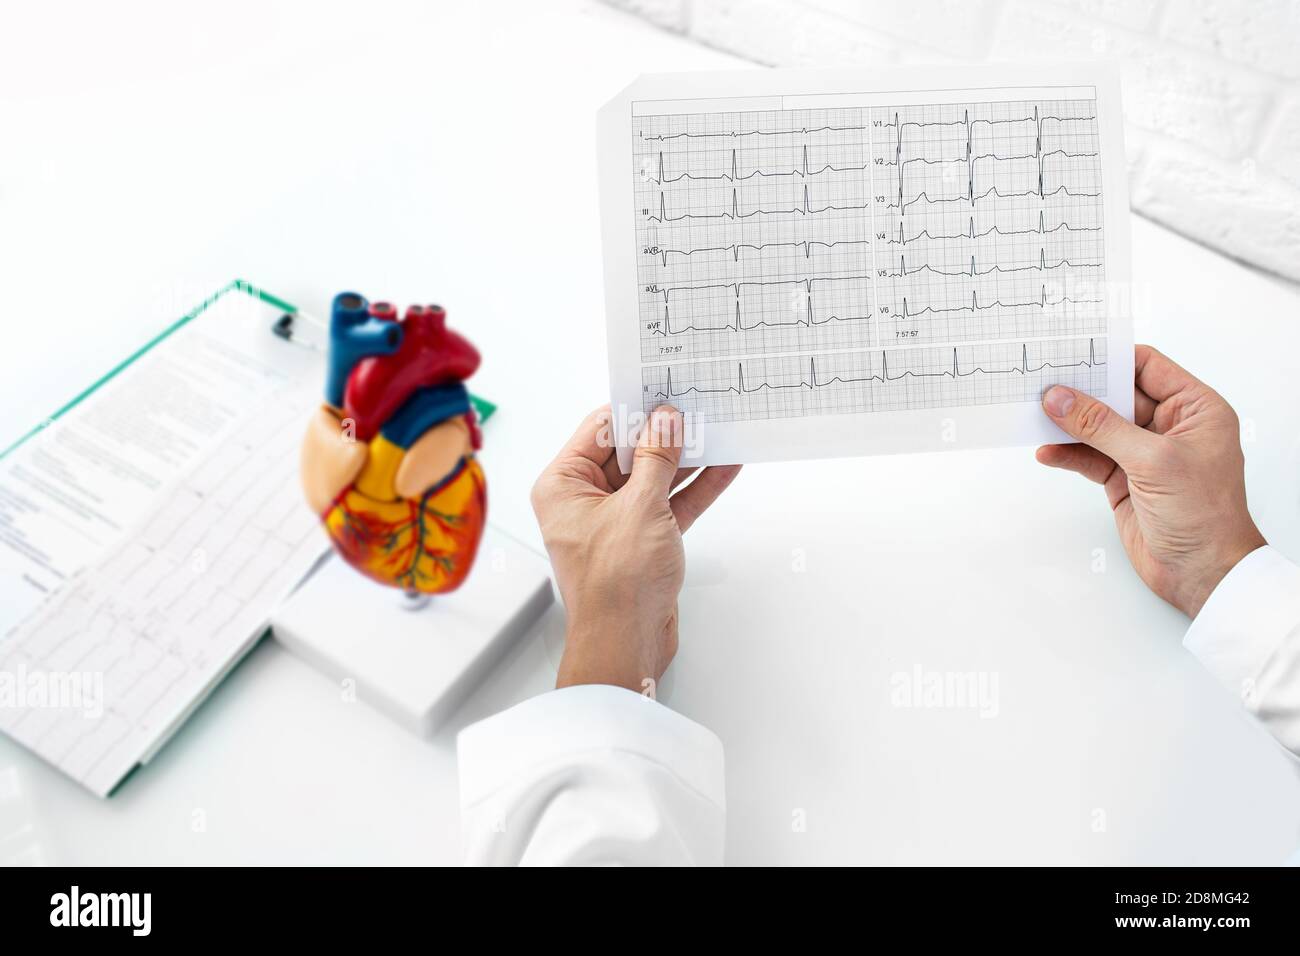 Cardiologist analyzing the results of a patient's electrocardiogram in his medical office. Heart diseases and medical treatment Stock Photo